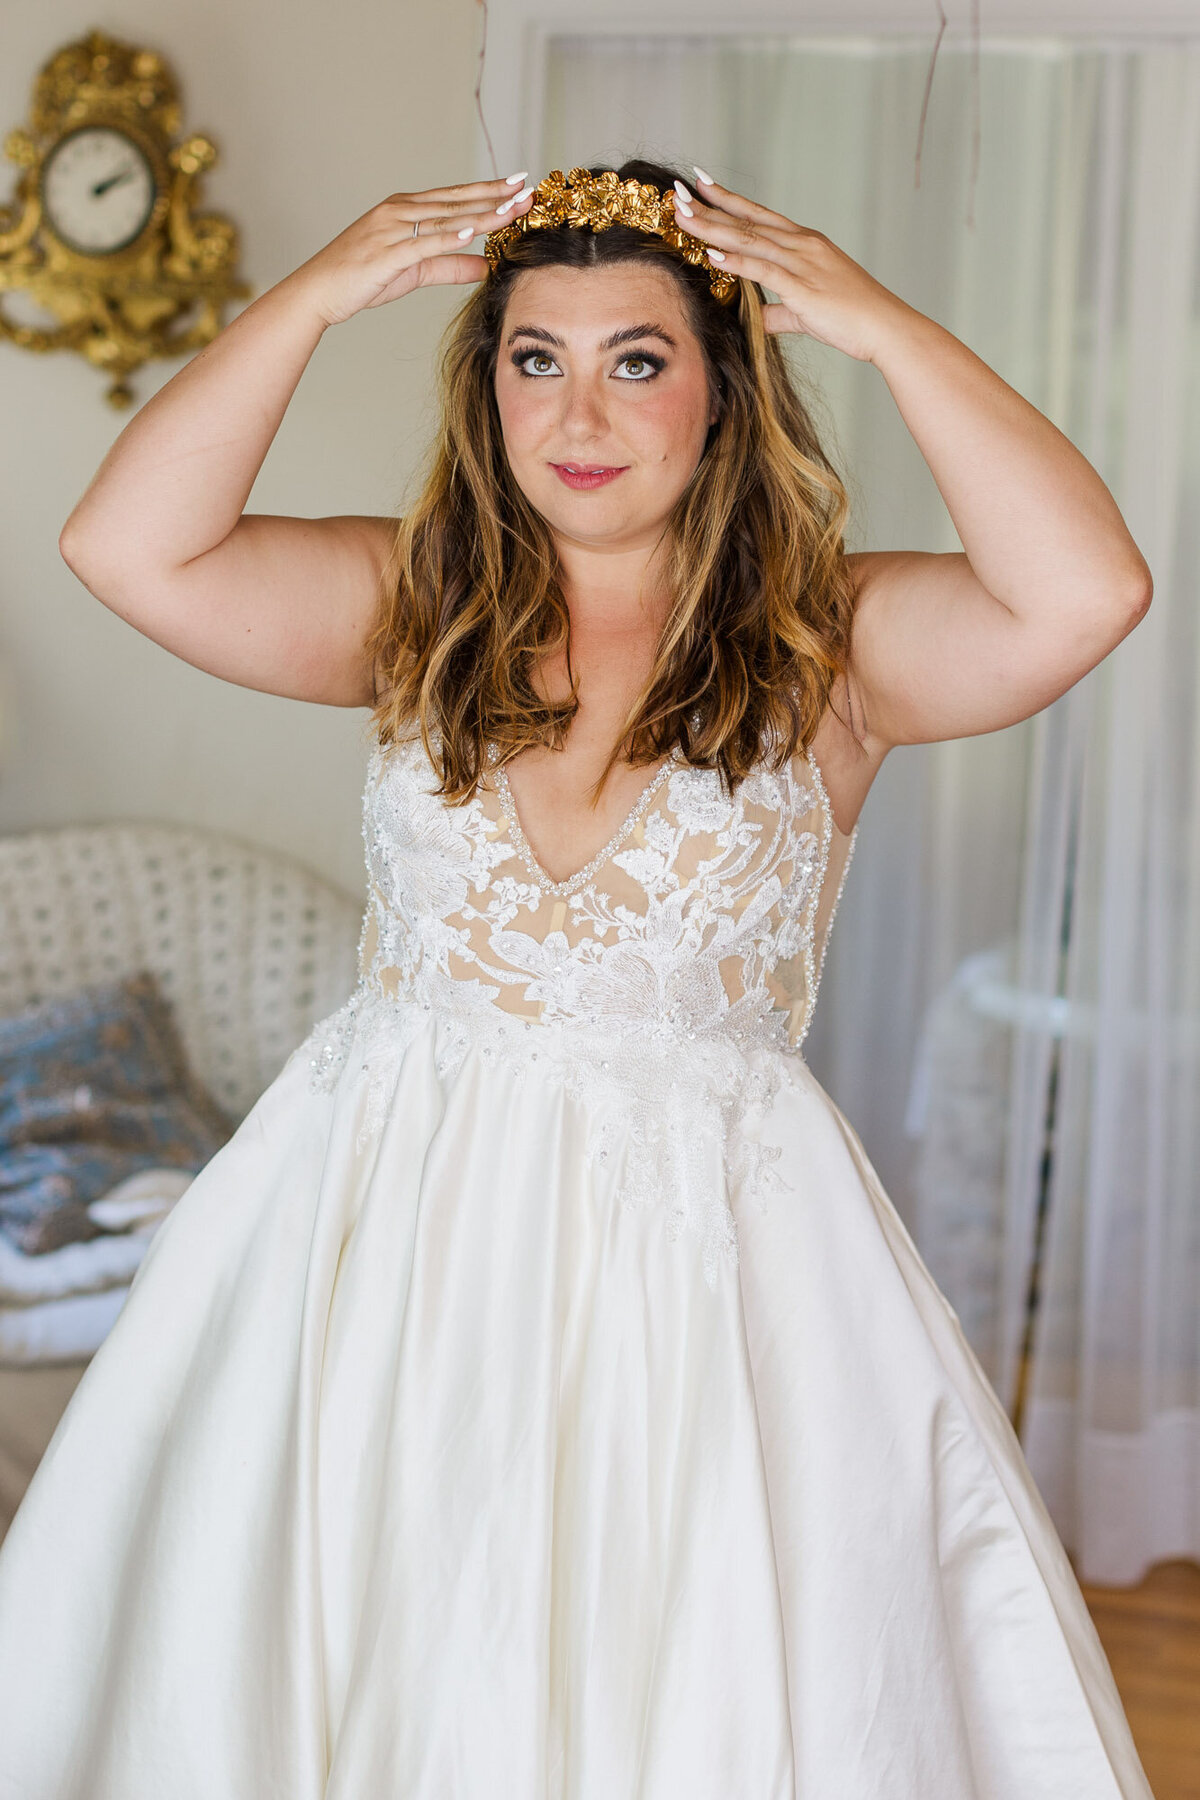 Bride-puts-on-her-bridal-crown-as-she-gets-ready-for-her-wedding-ceremony-at-Vashon-Field-in-Pond-venue-near-Seattle-photo-by-Joanna-Monger-Photography